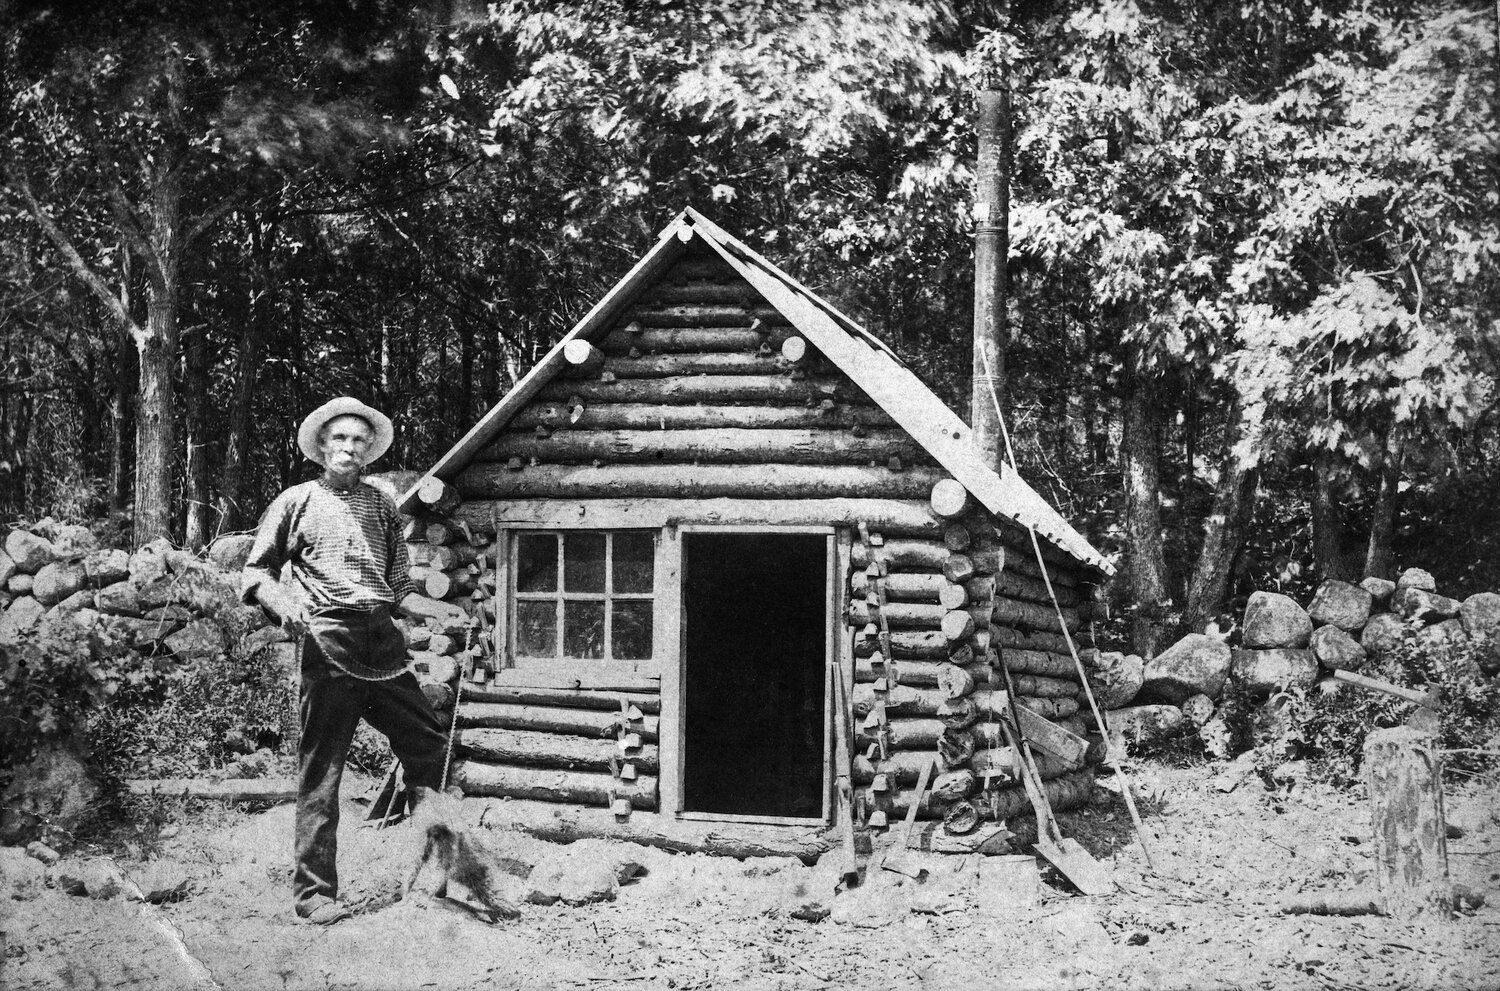 Mason Augustus Walton at age 49, in front of his home in the back woods of Ravenswood. 